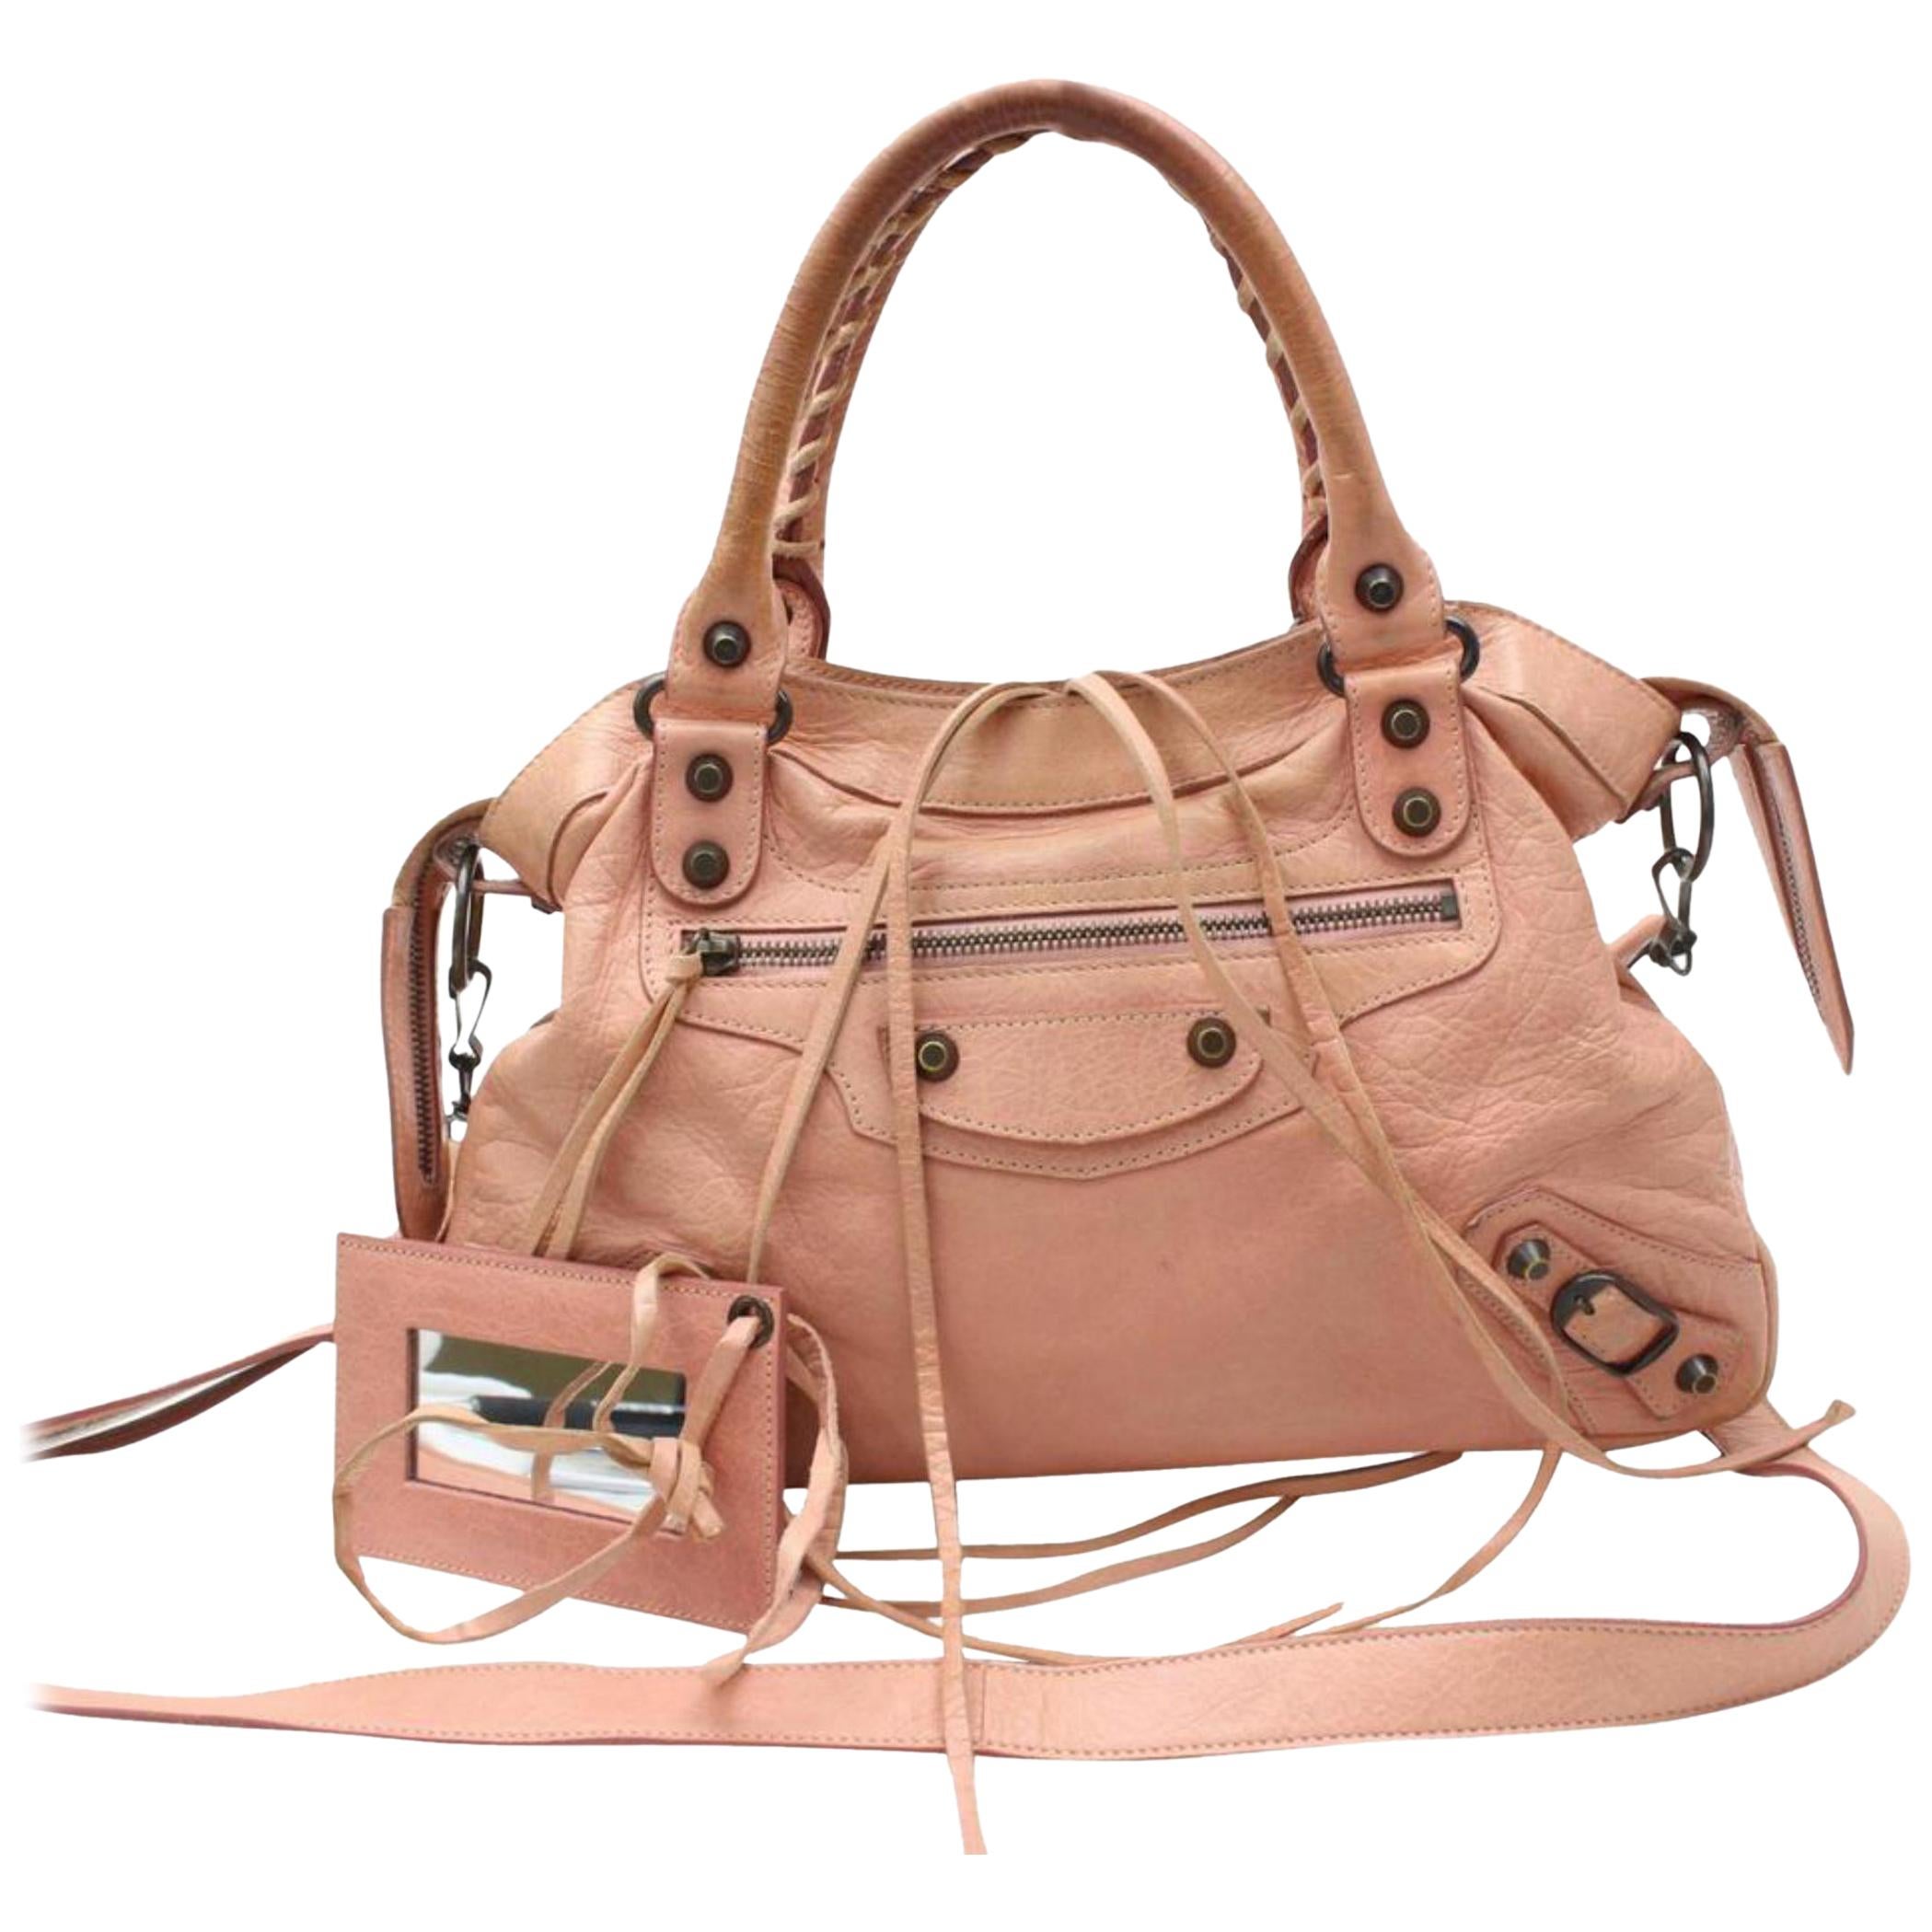 Balenciaga The Town 2way 865676 Pink Leather Shoulder Bag For Sale